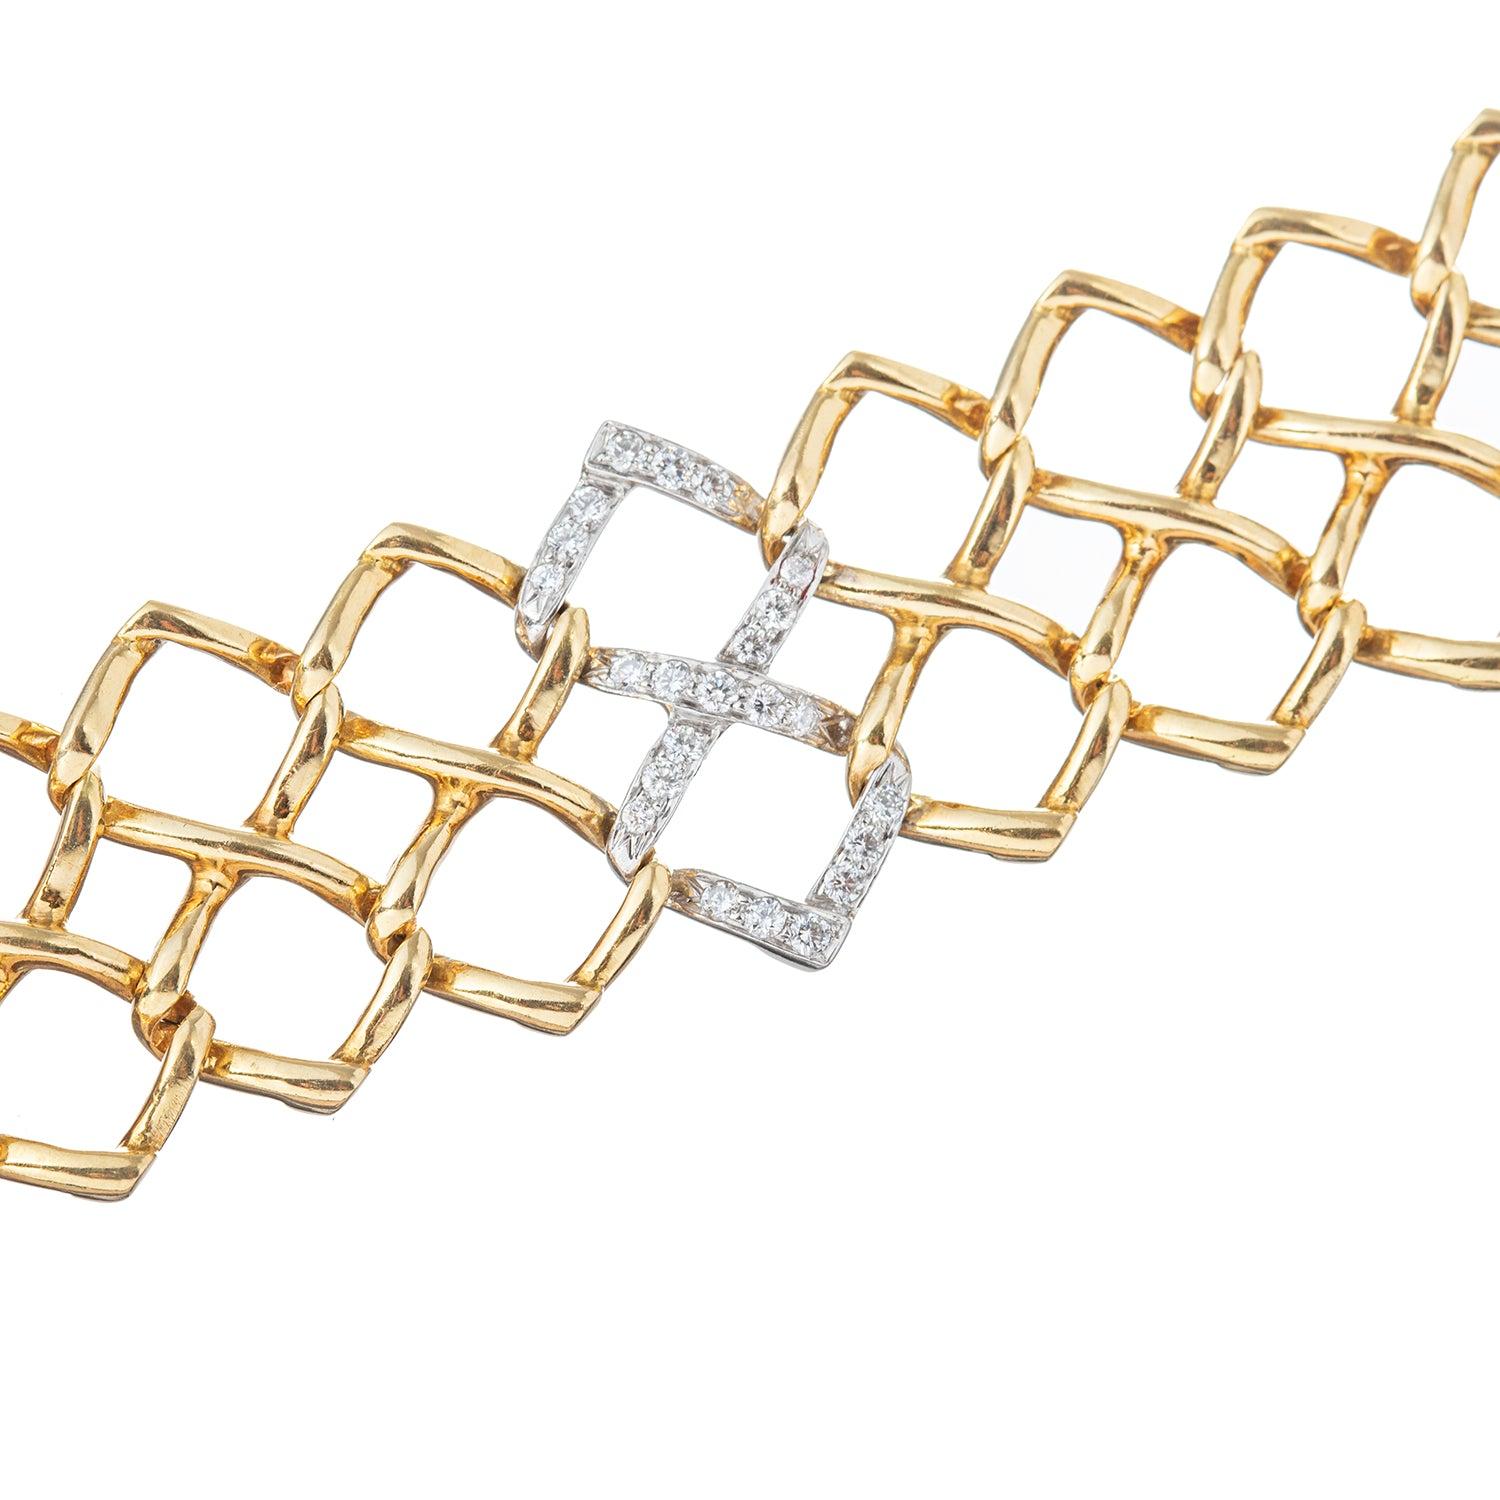 Openwork double link bracelet in polished 18k yellow gold with one of the double links accented by round brilliant-cut diamonds in platinum.

Twenty-three diamonds weighing 0.33 total carats.  Signed '1982 TIFFANY & CO. PALOMA PICASSO'.  6.75